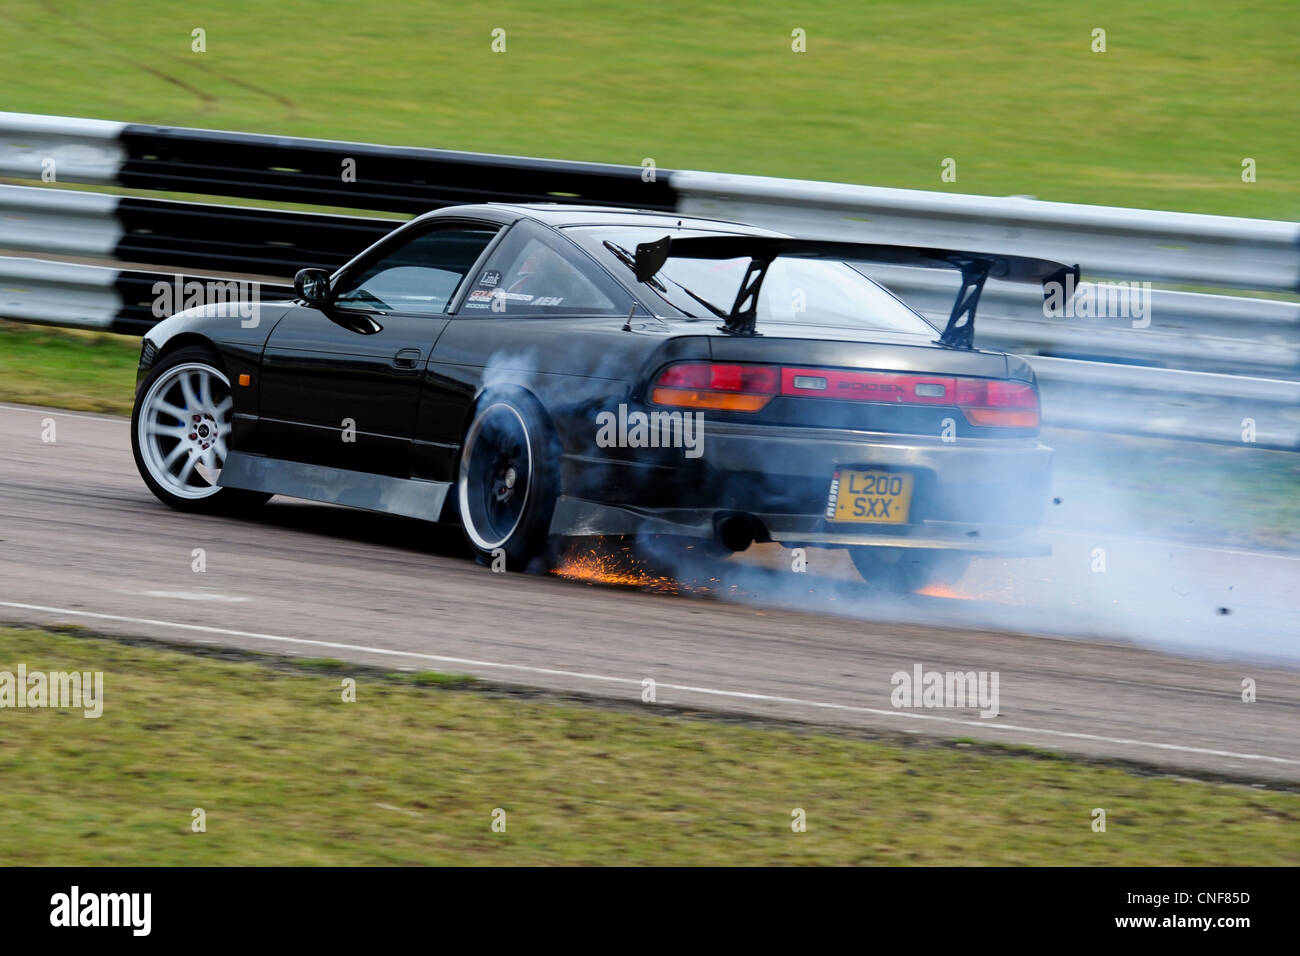 Car drifting at Lydden Hill Race Circuit Track Kent England Dover Smoking Sparks Flying Nissan 200SX Shredding Rubber Stock Photo